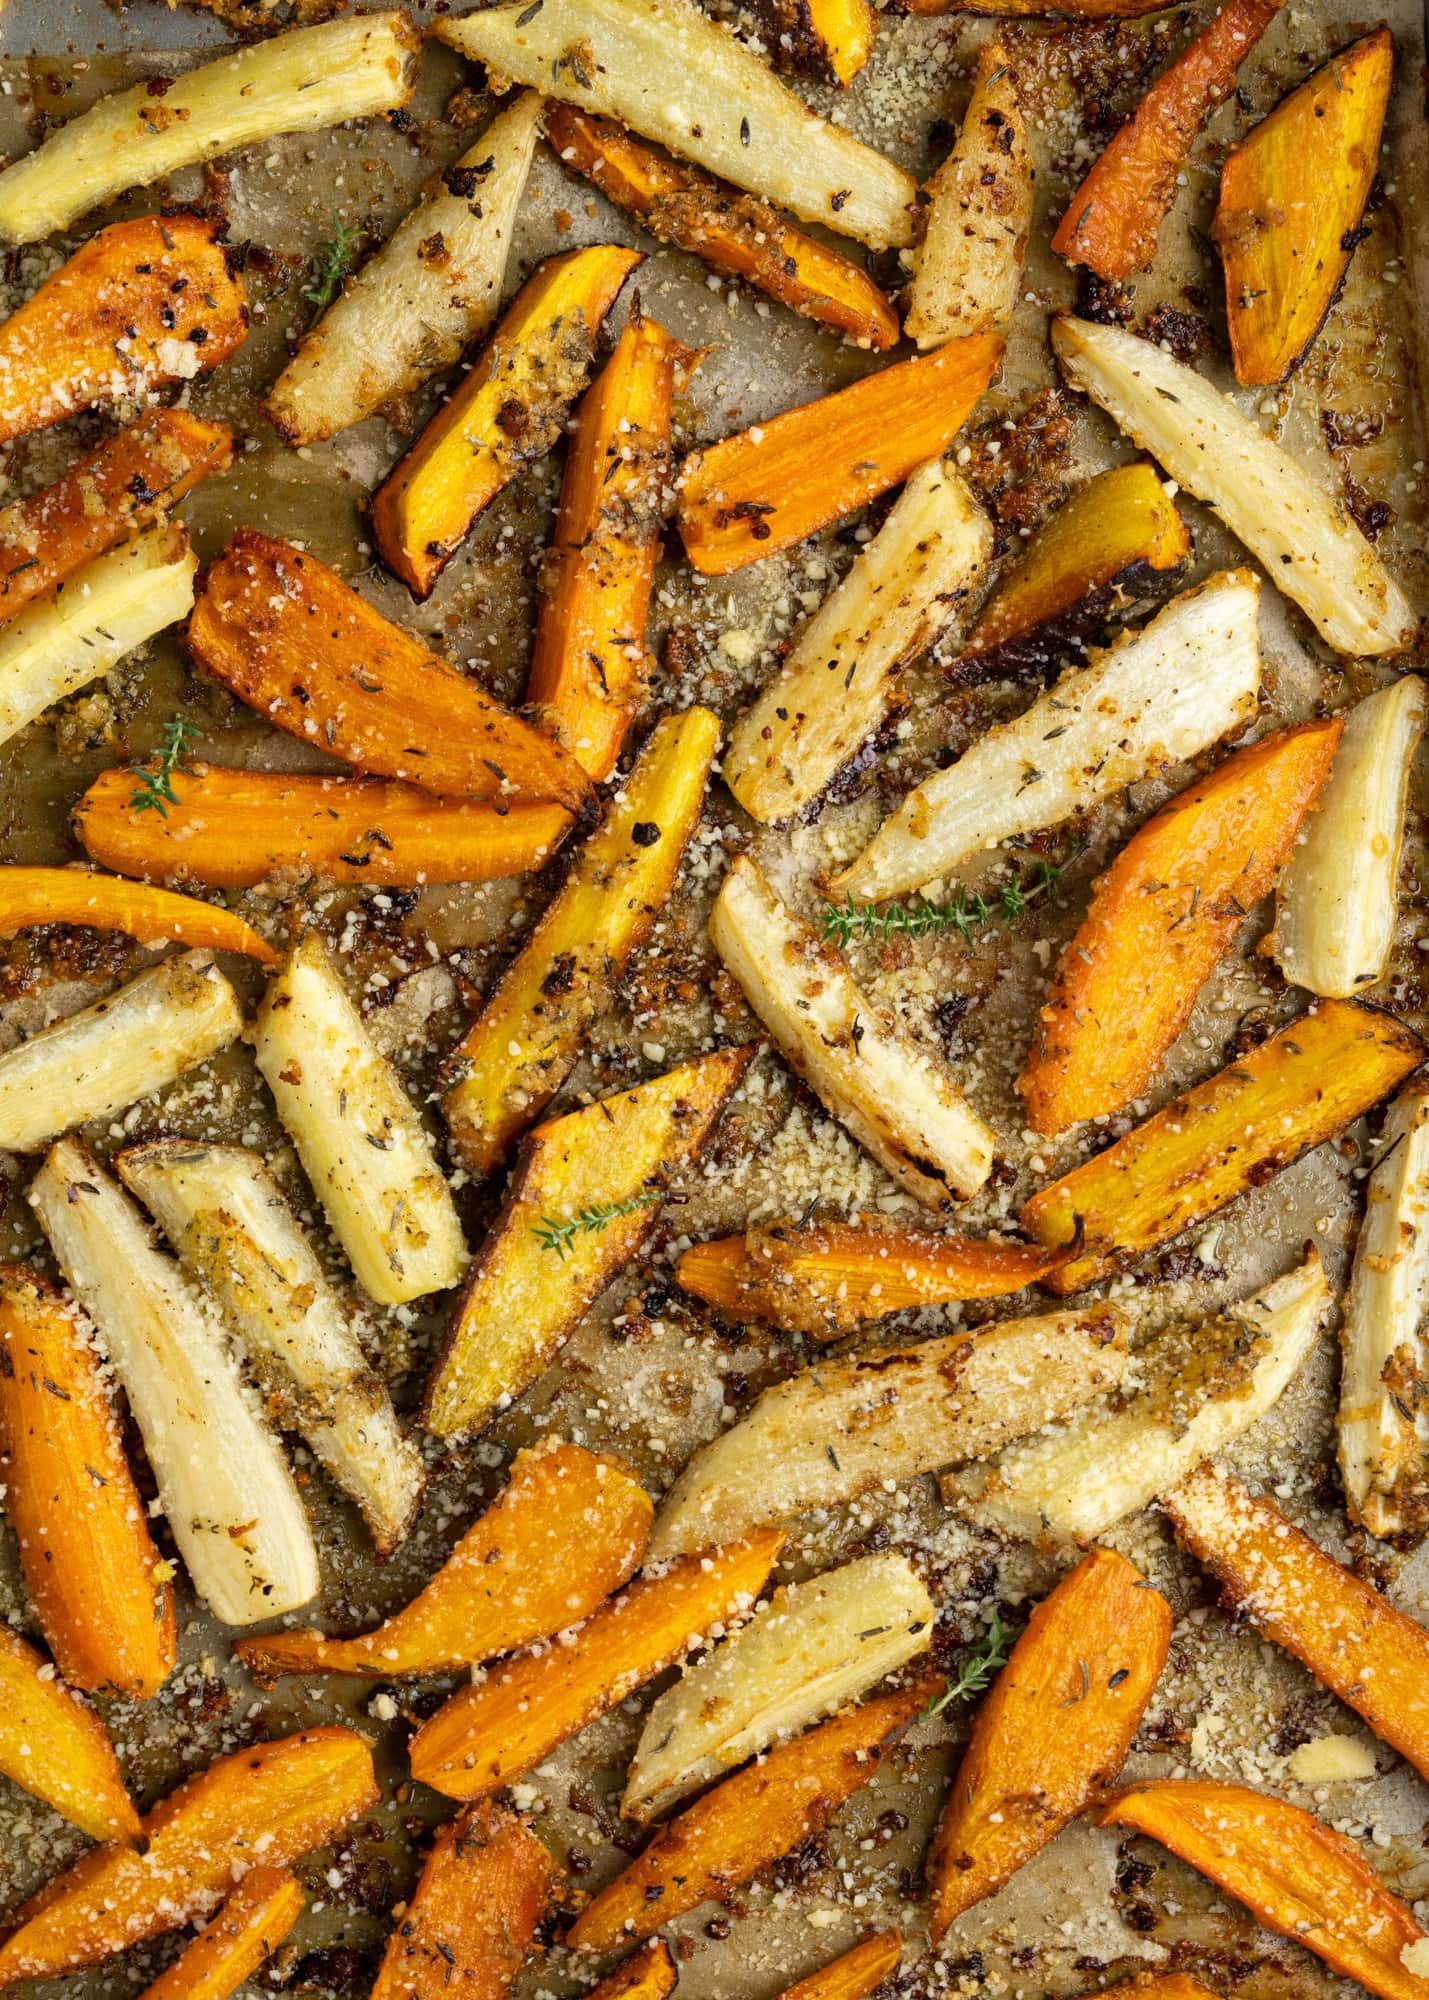 Garlic parmesan Carrots roasted in oven until caramalized around the edges 